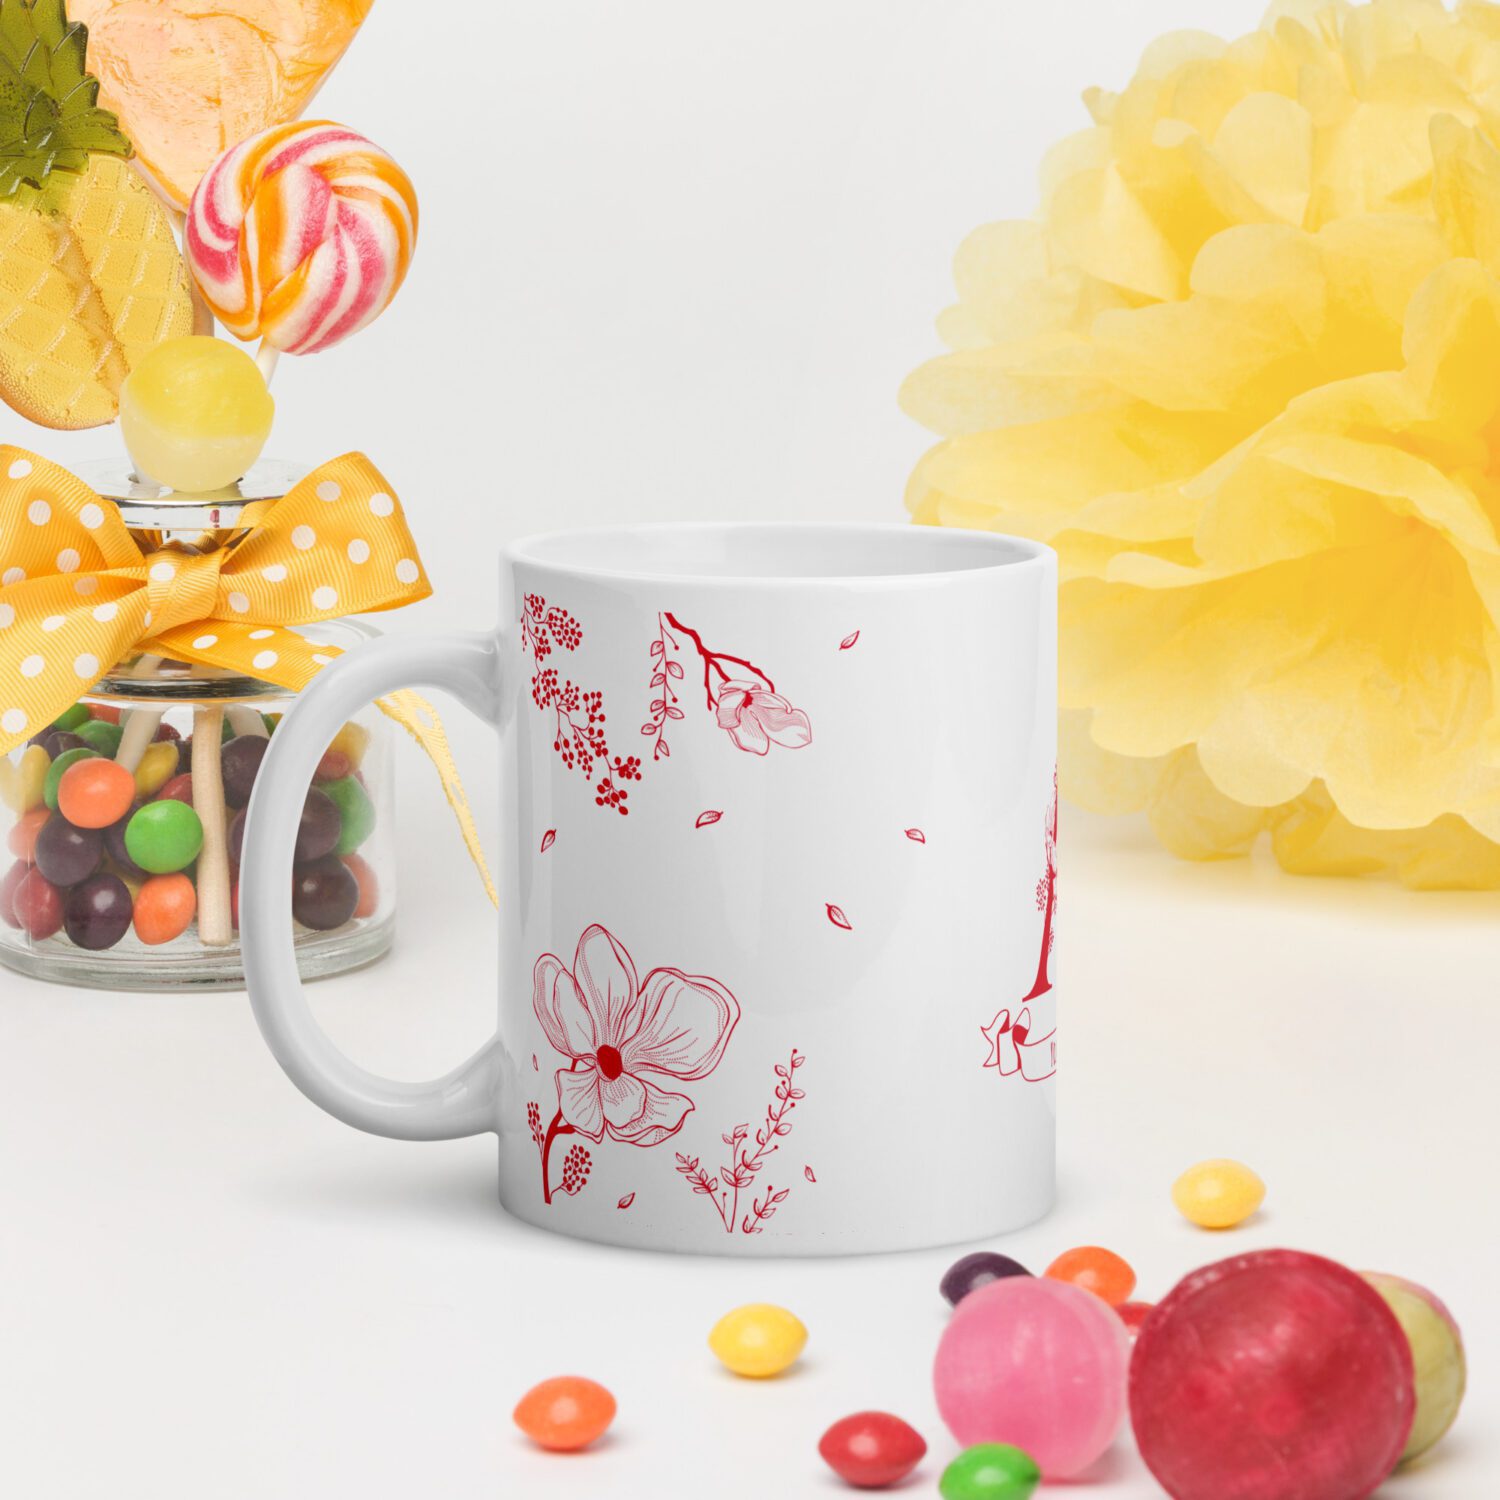 Custom Mug with Your Name "A letter", red